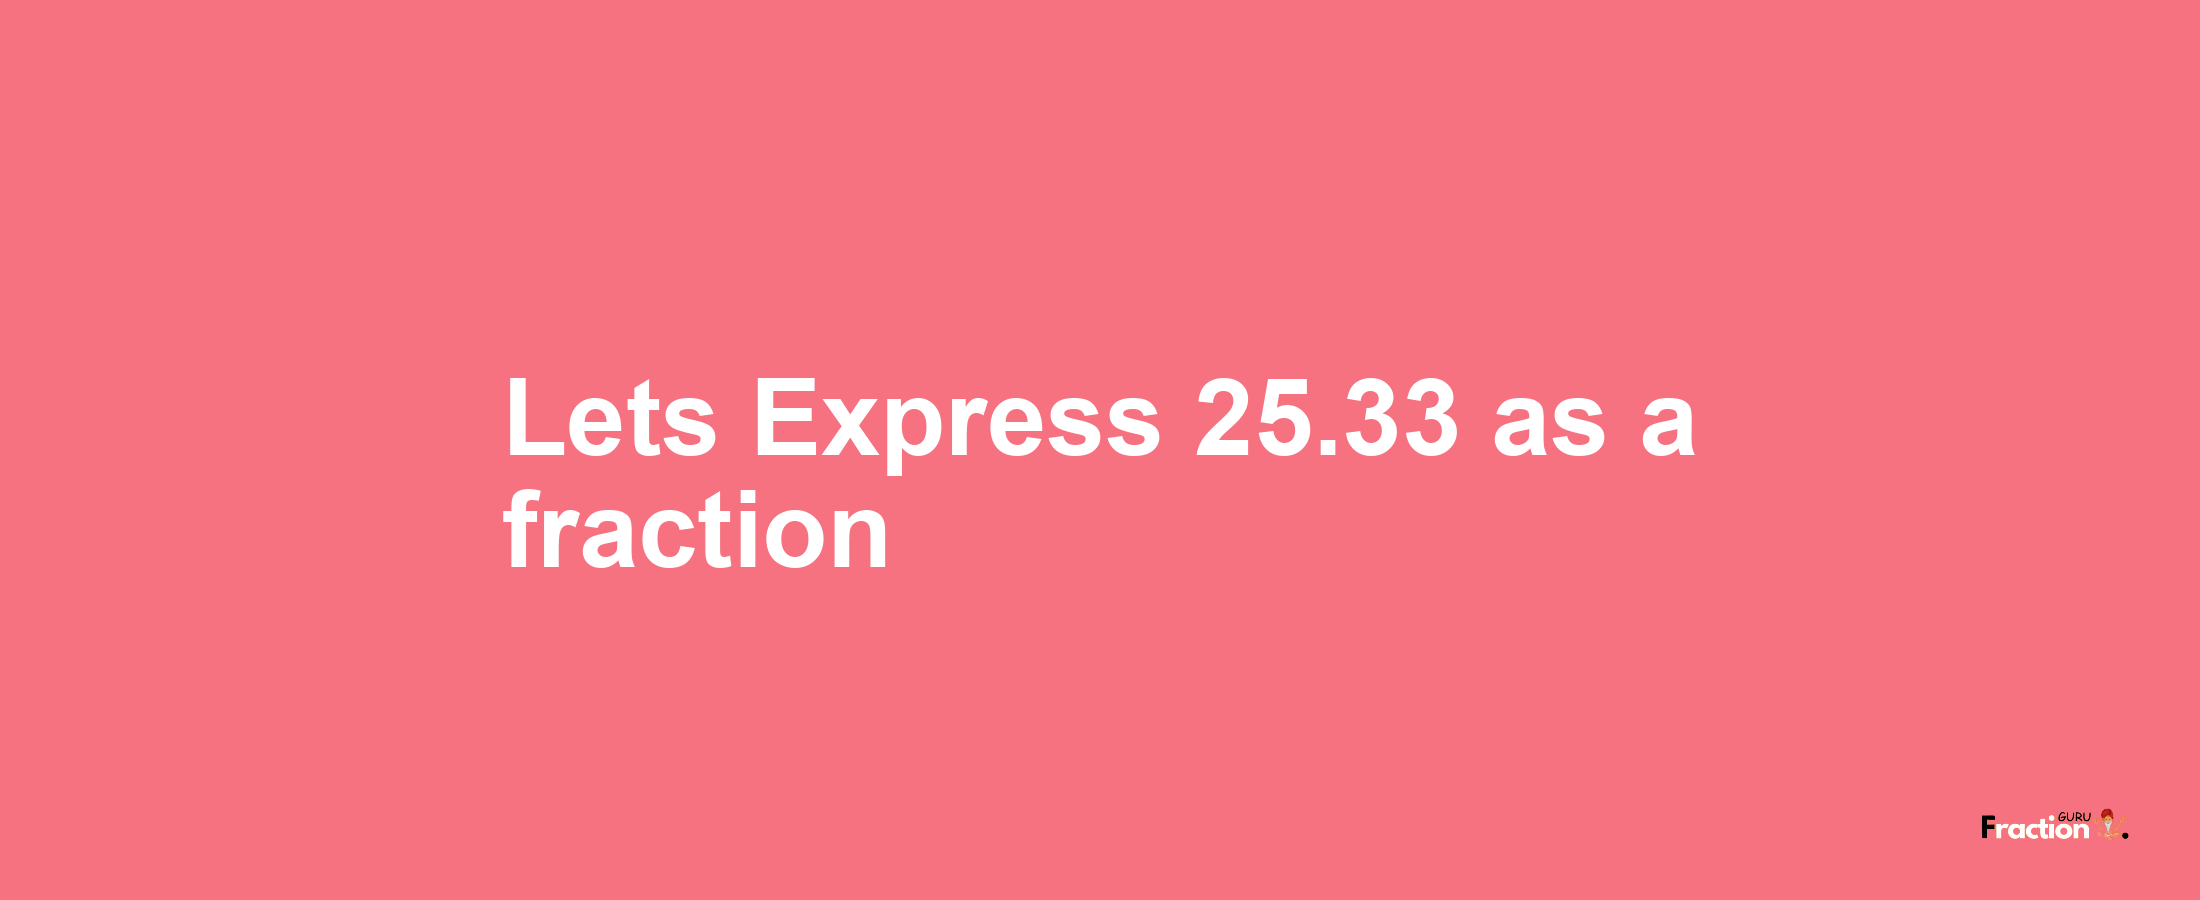 Lets Express 25.33 as afraction